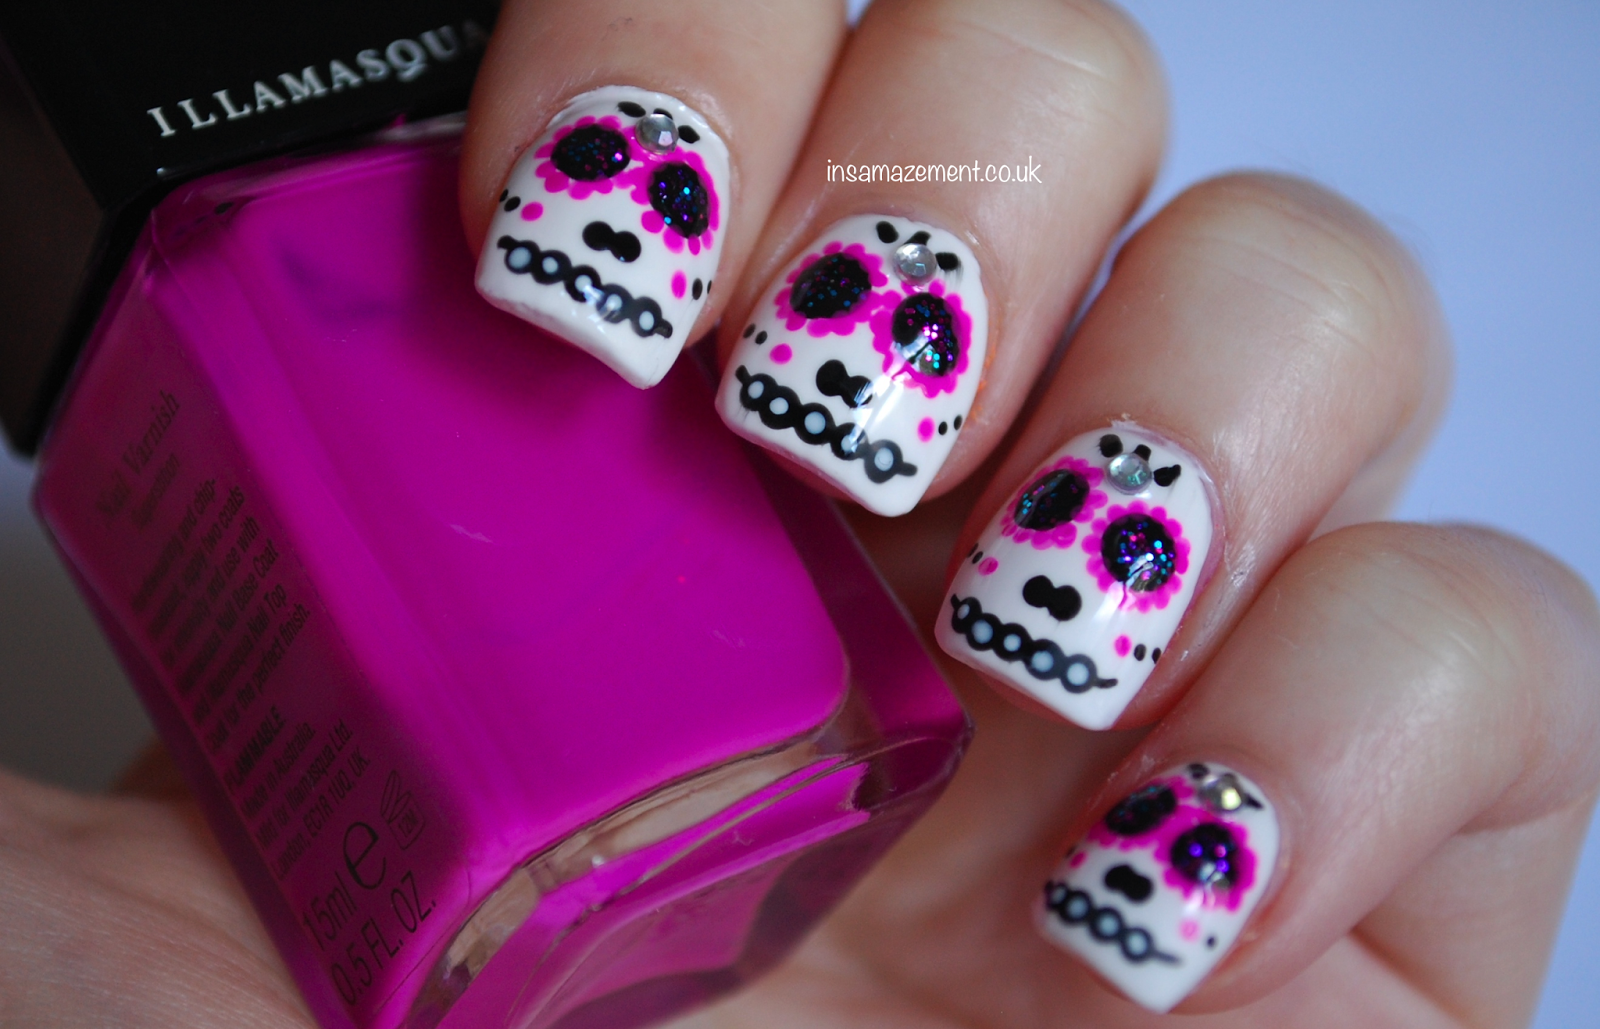 1. "Candy Skull Nail Art Tutorial" - wide 9